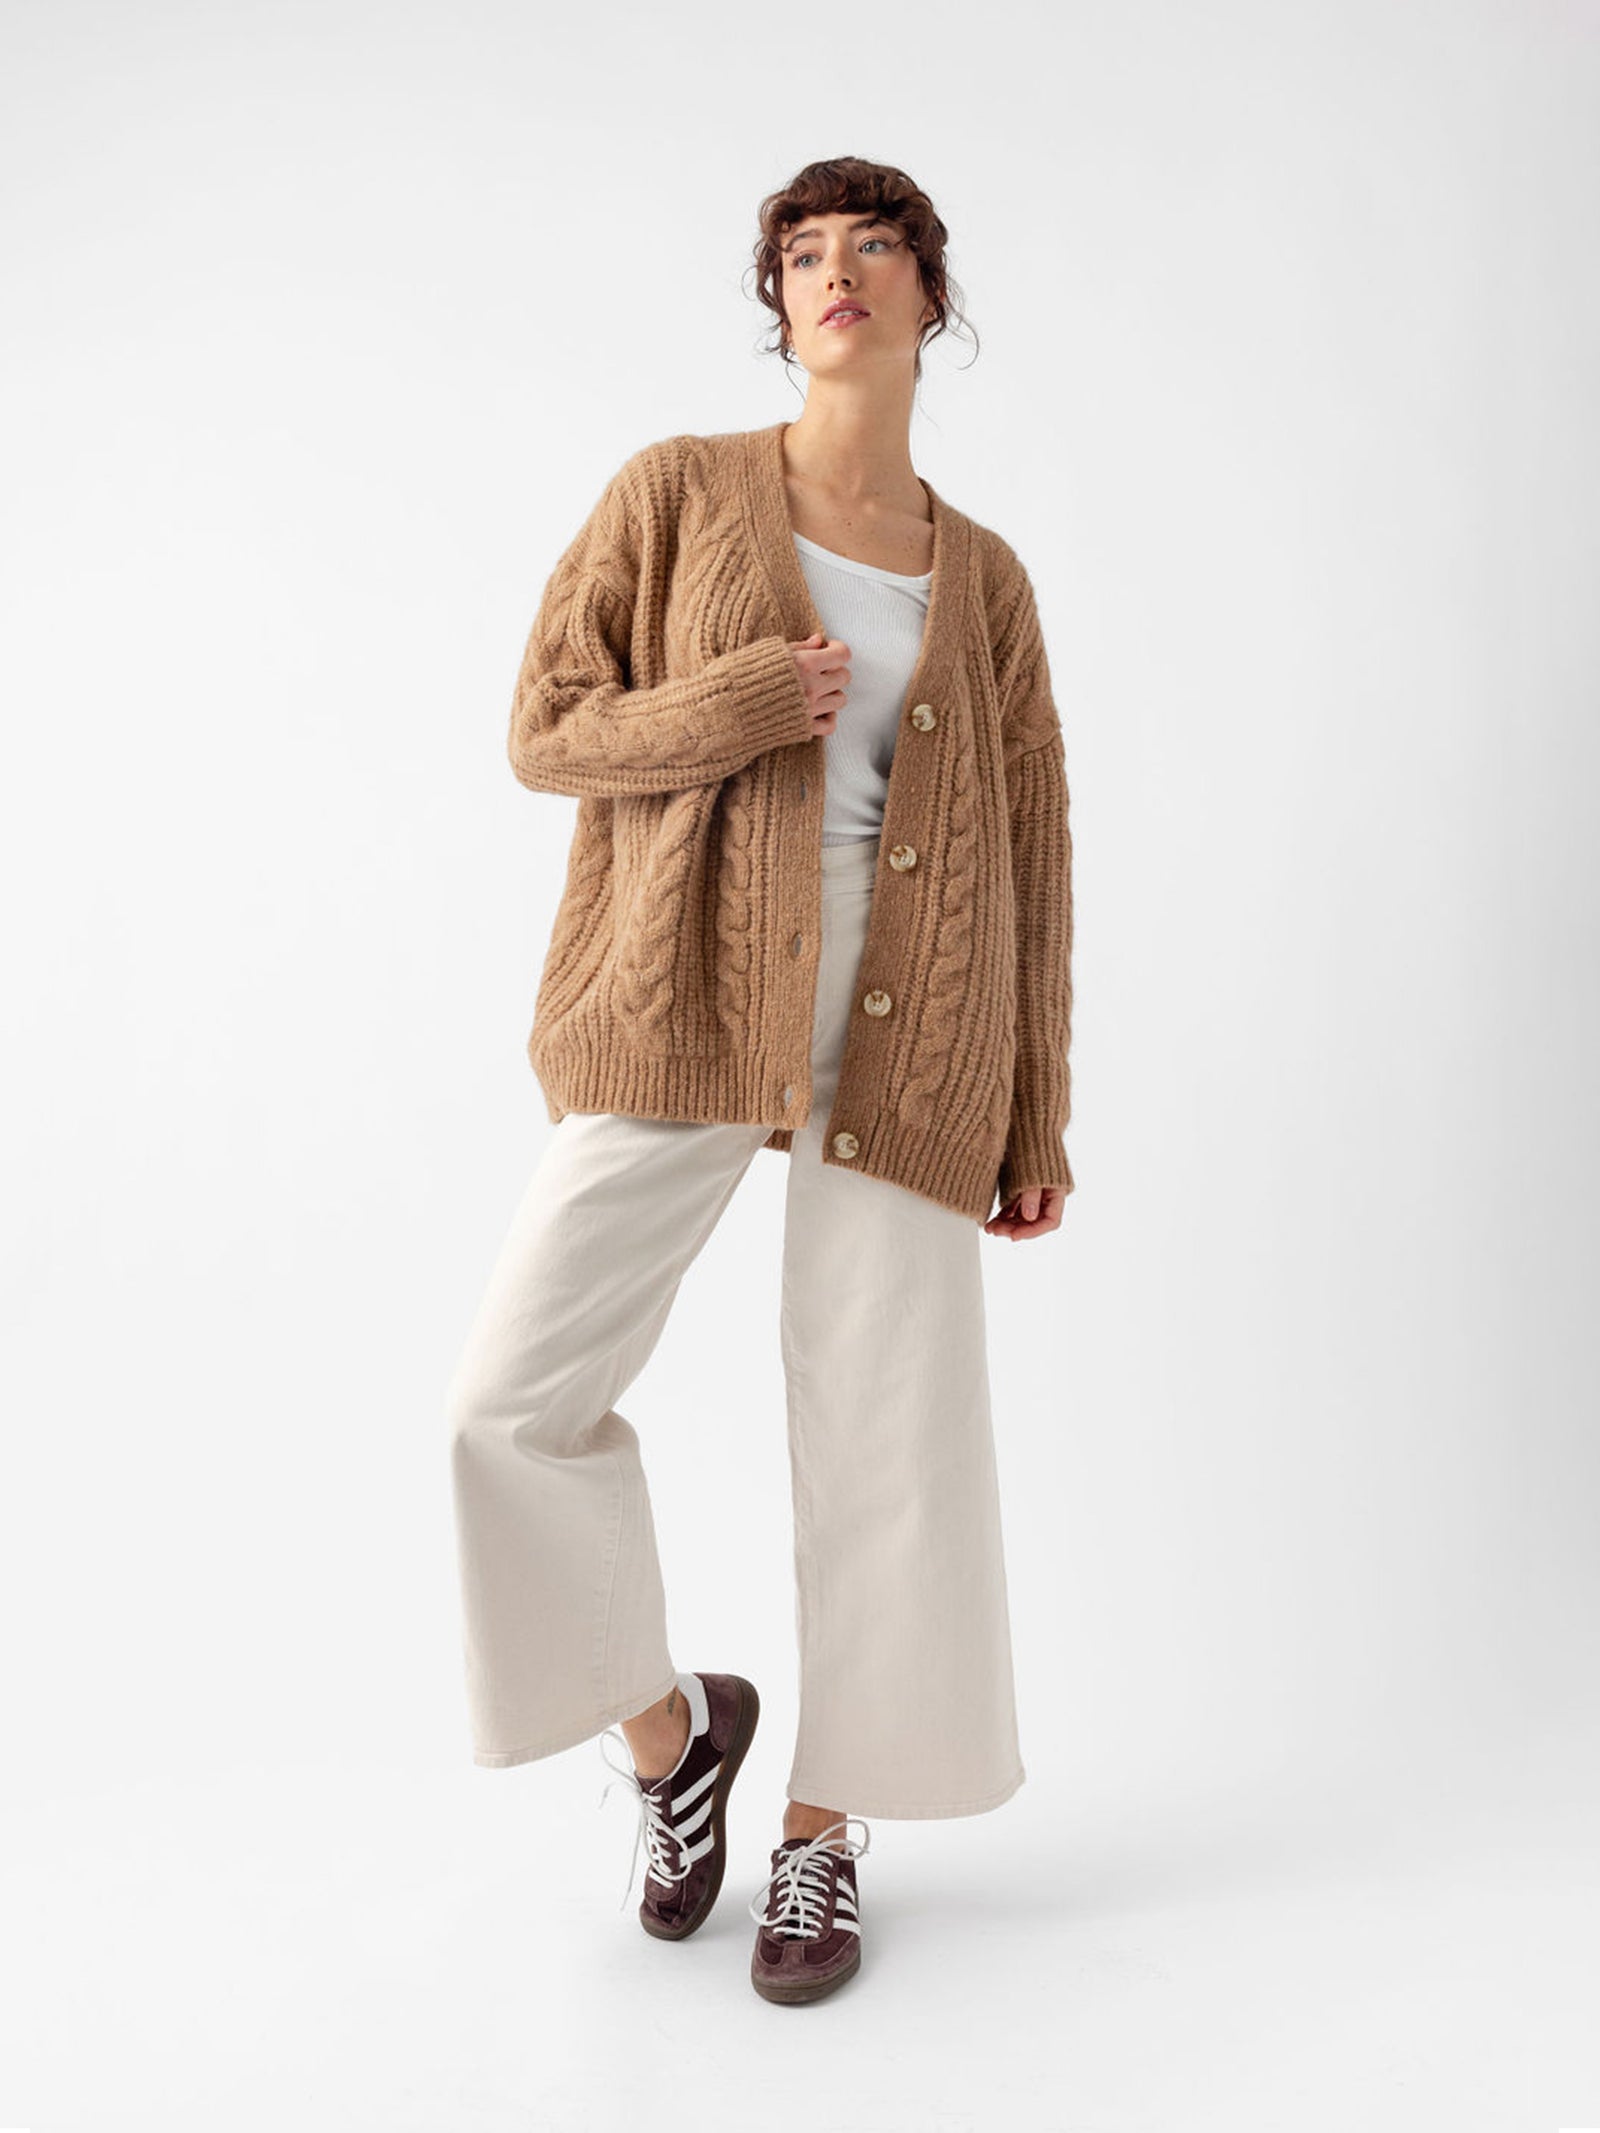 Studio image of woman in camel cardigan and off-white pants 